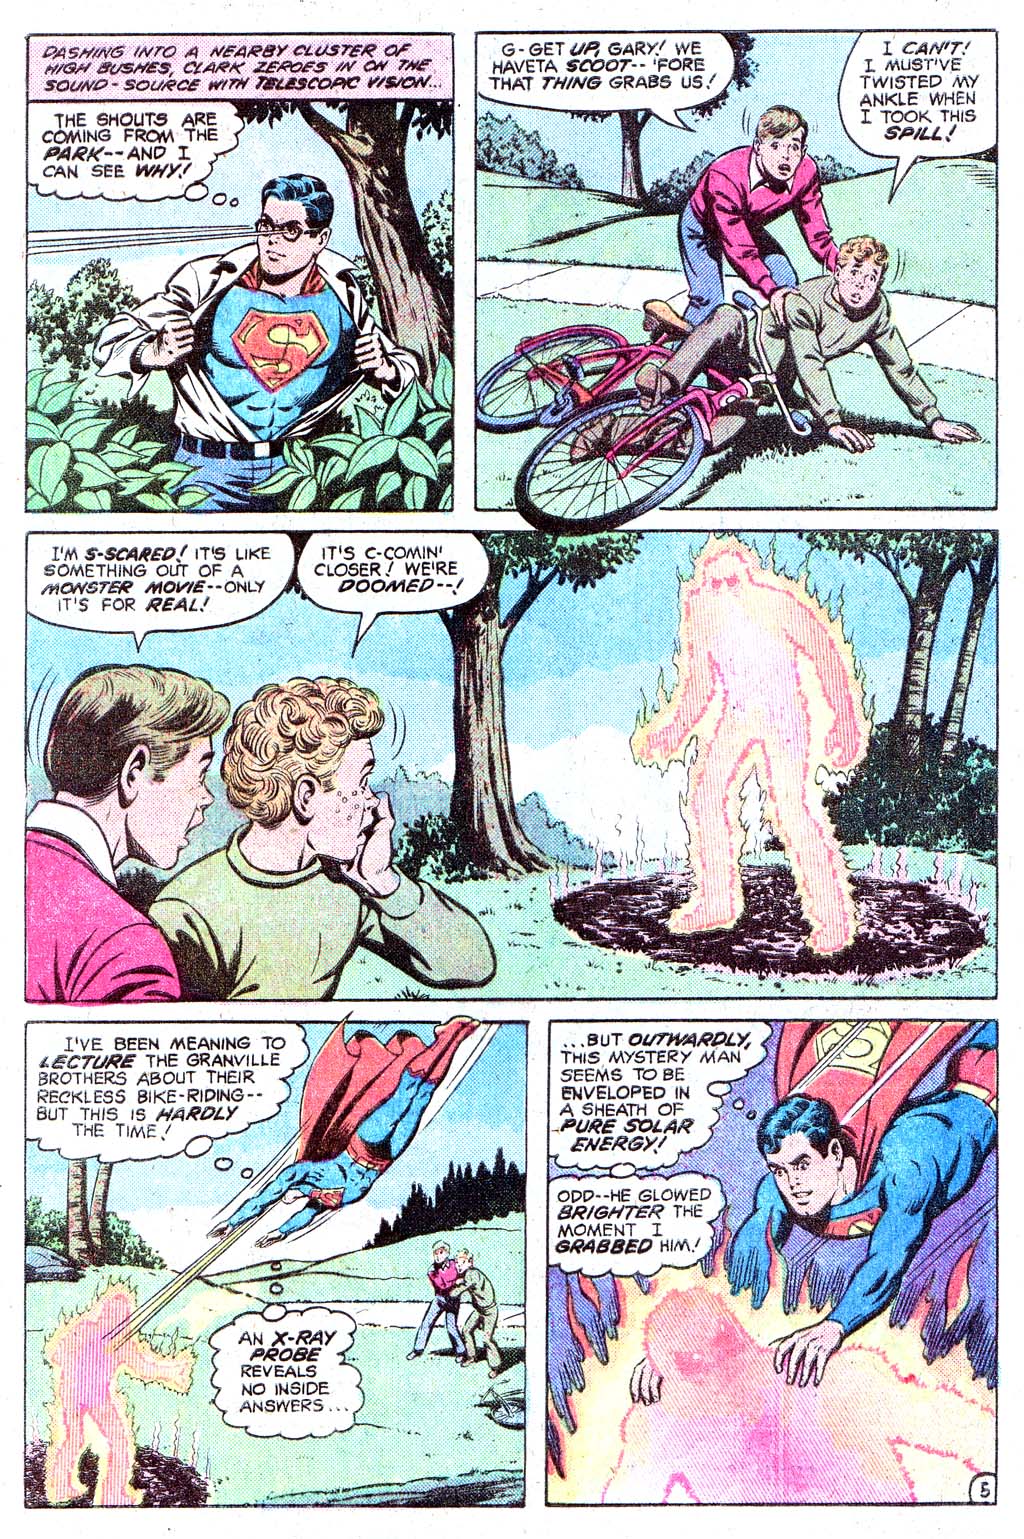 The New Adventures of Superboy 30 Page 8